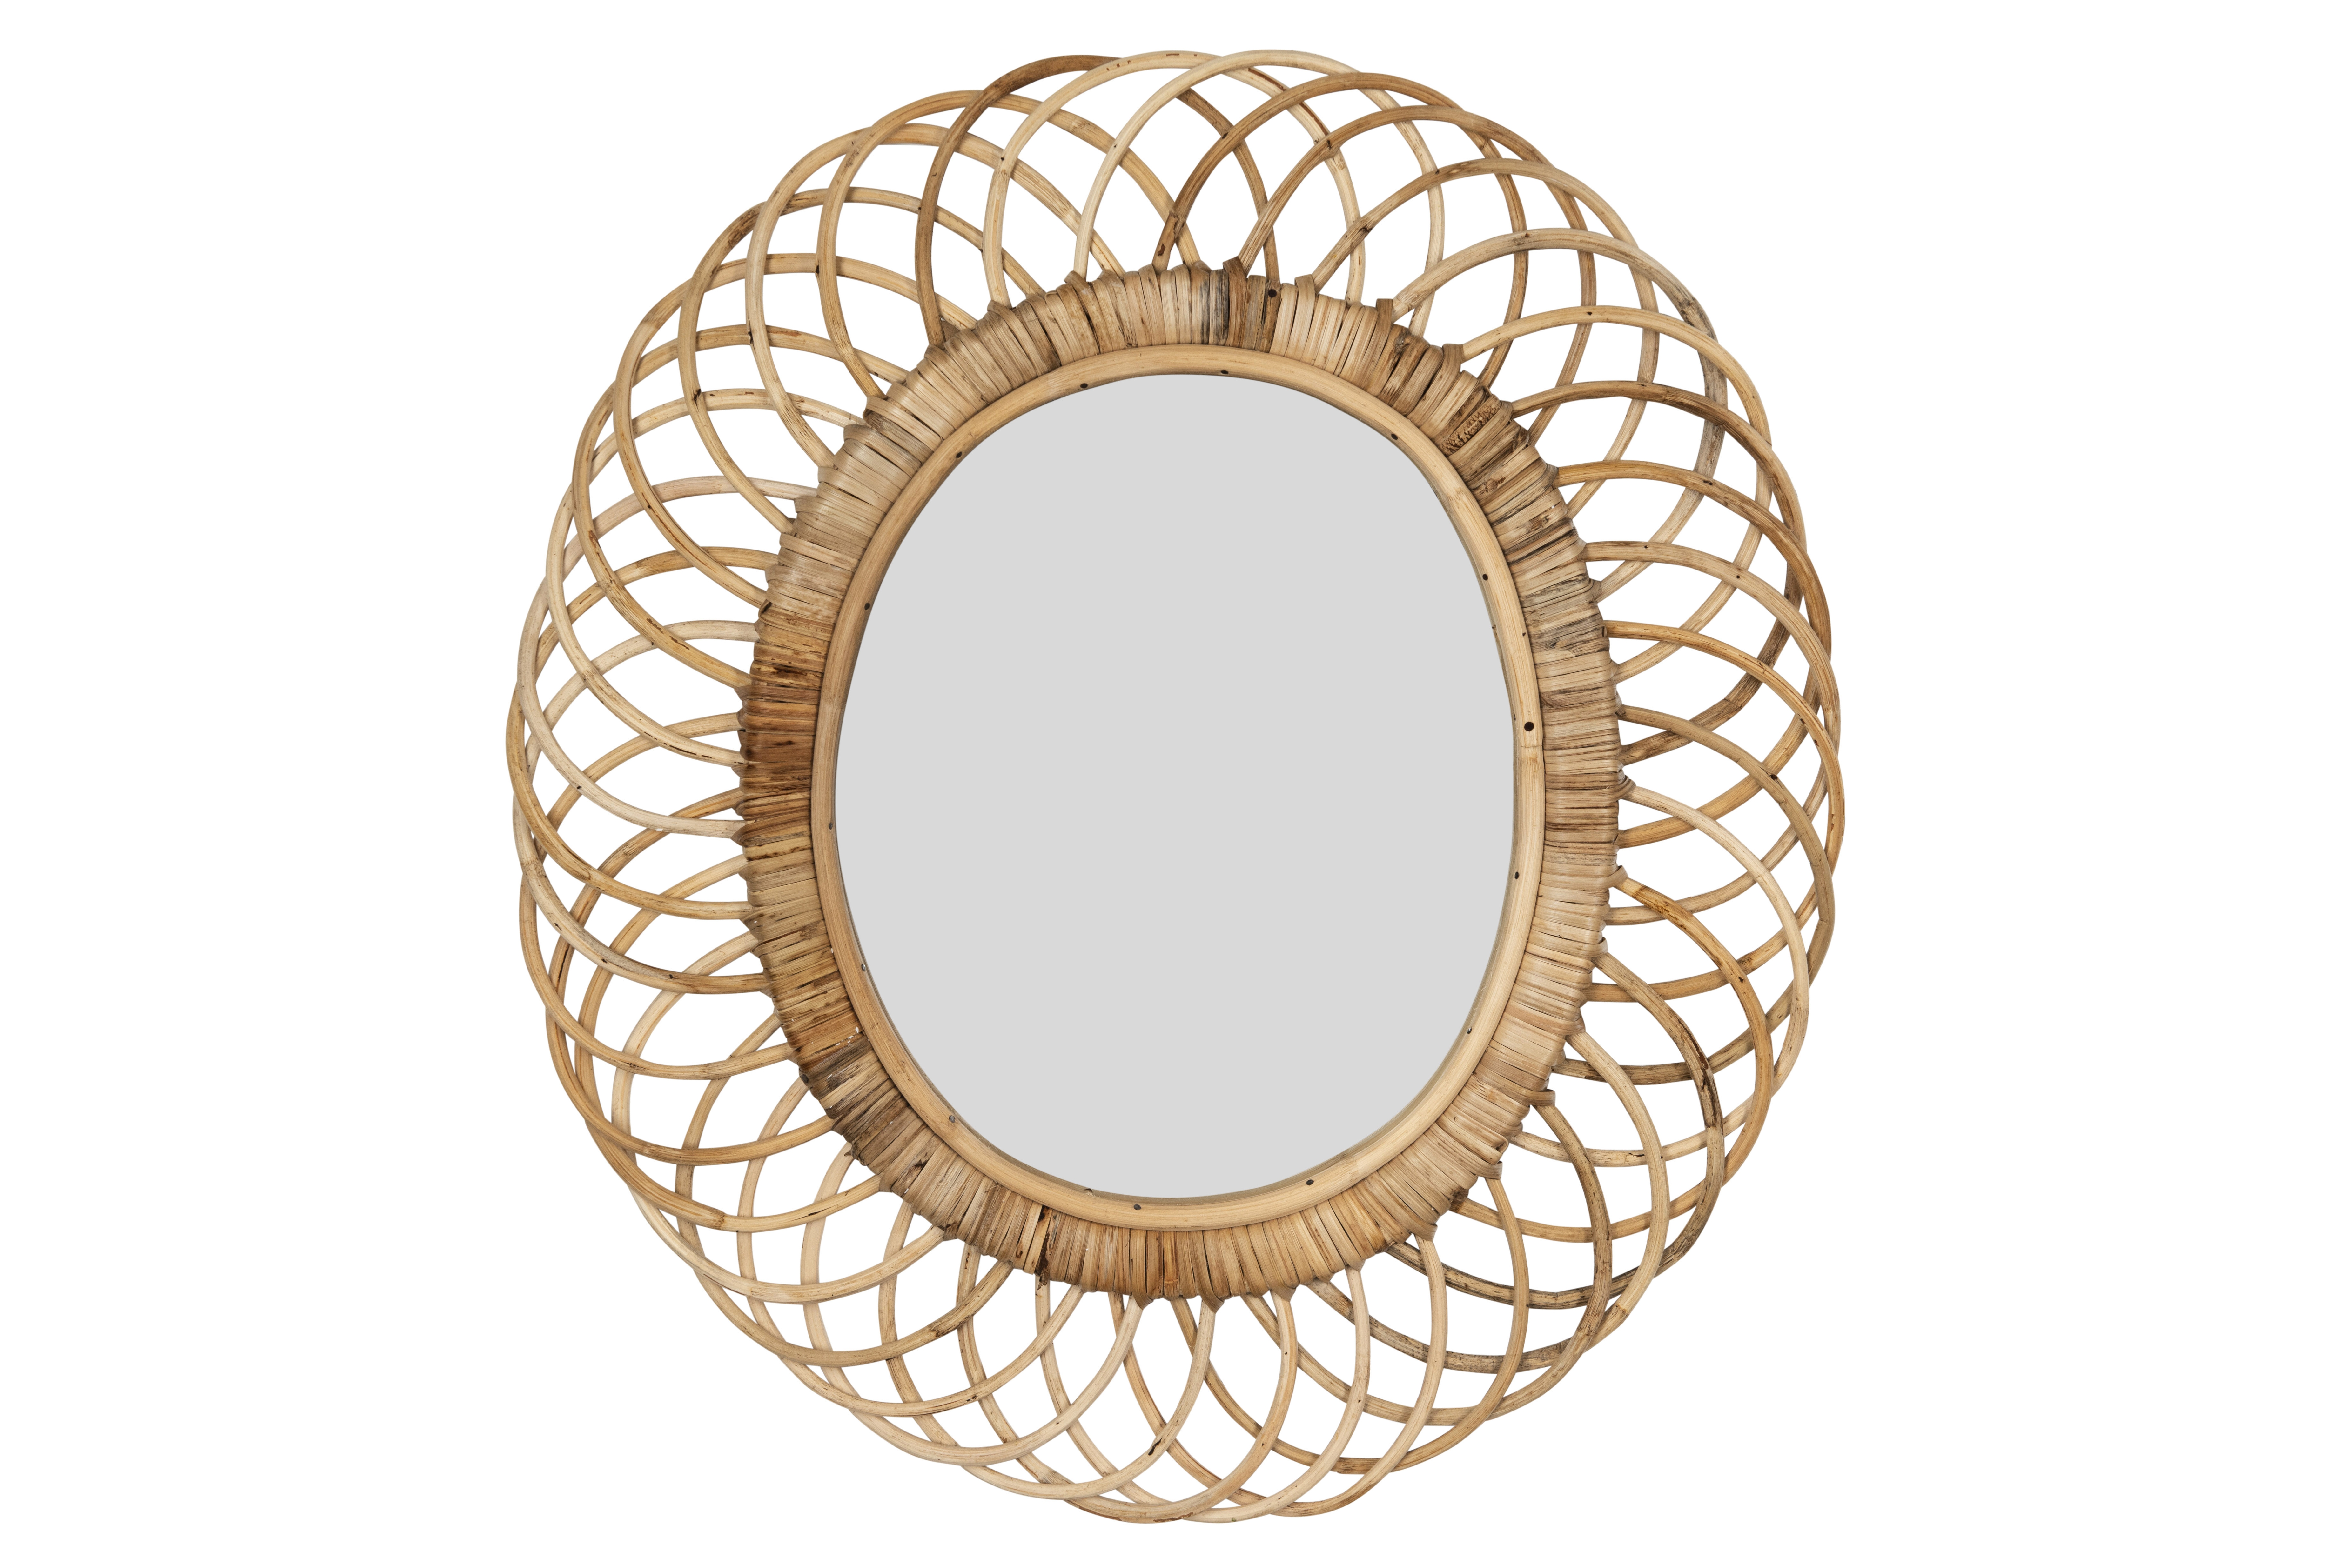 Oval Woven Bamboo Wall Mirror - Nomad Home